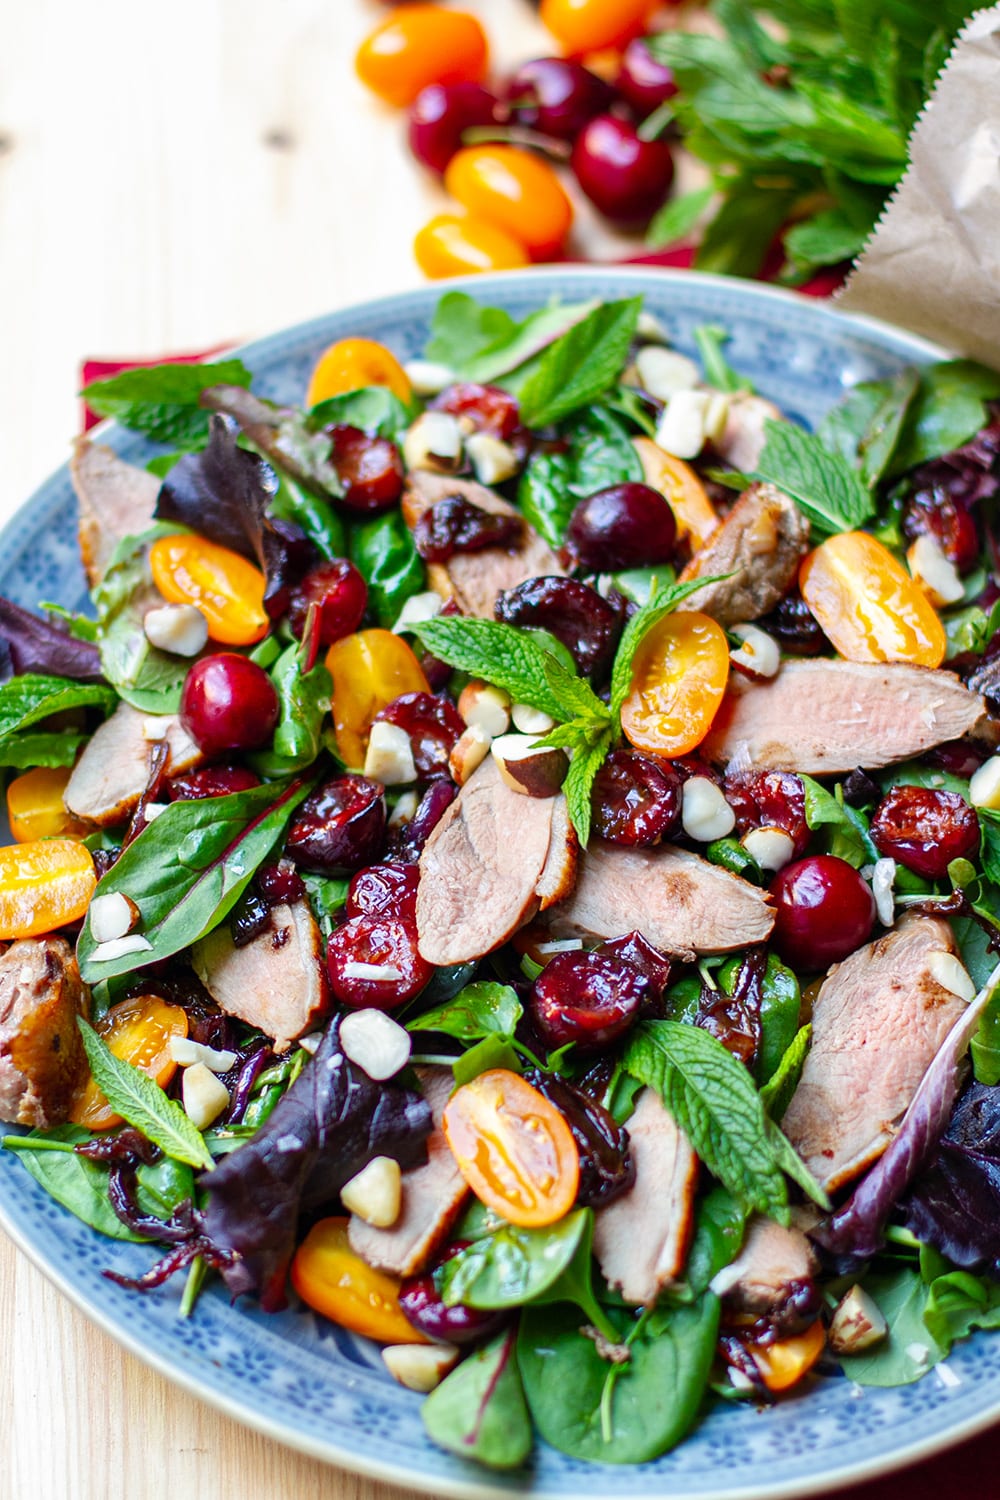 Duck Salad Recipe With Balsamic Cherries Onions & Mint